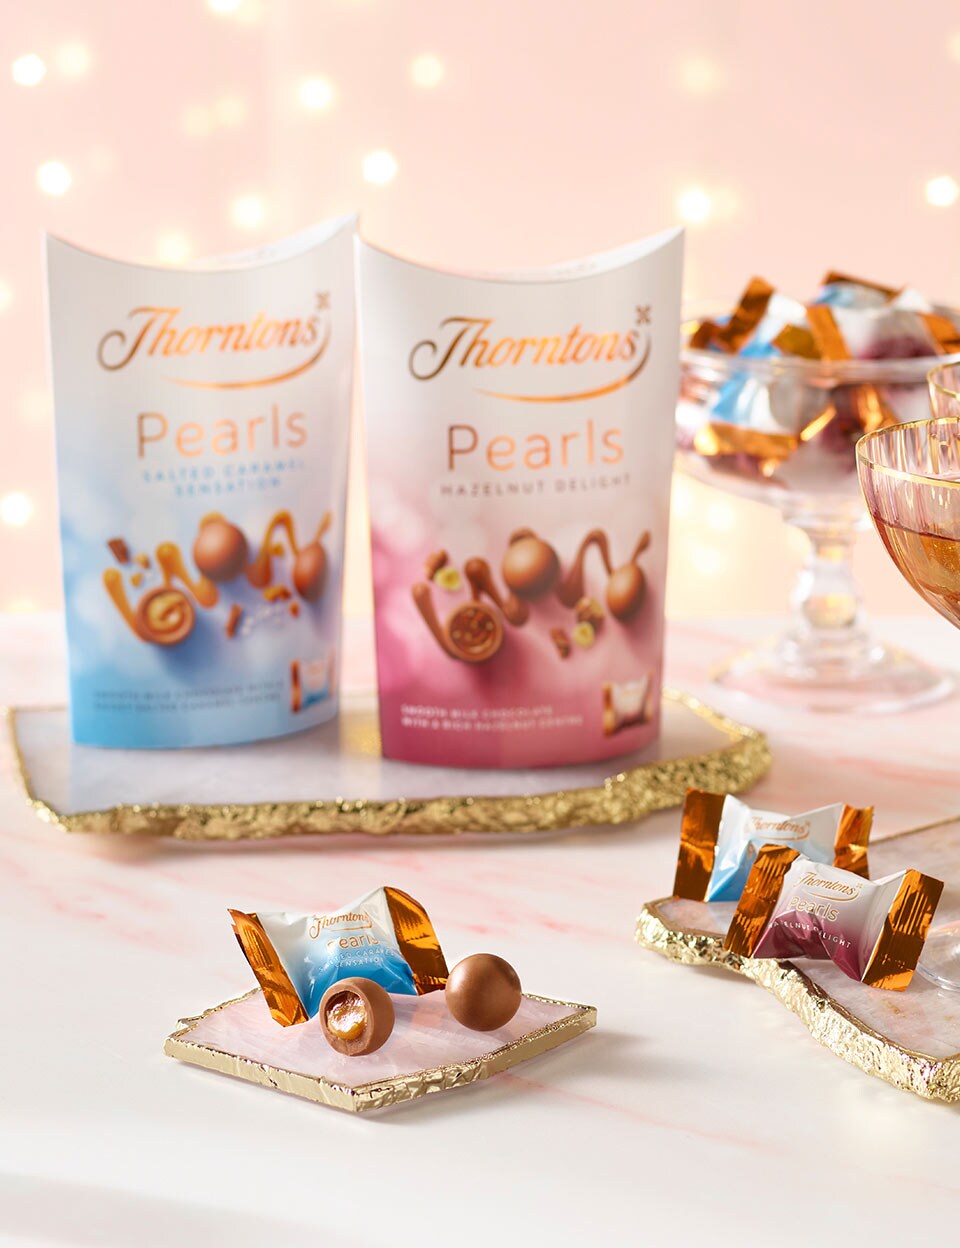 Thorntons Pearls hazelnut and salted caramel on a table dressed